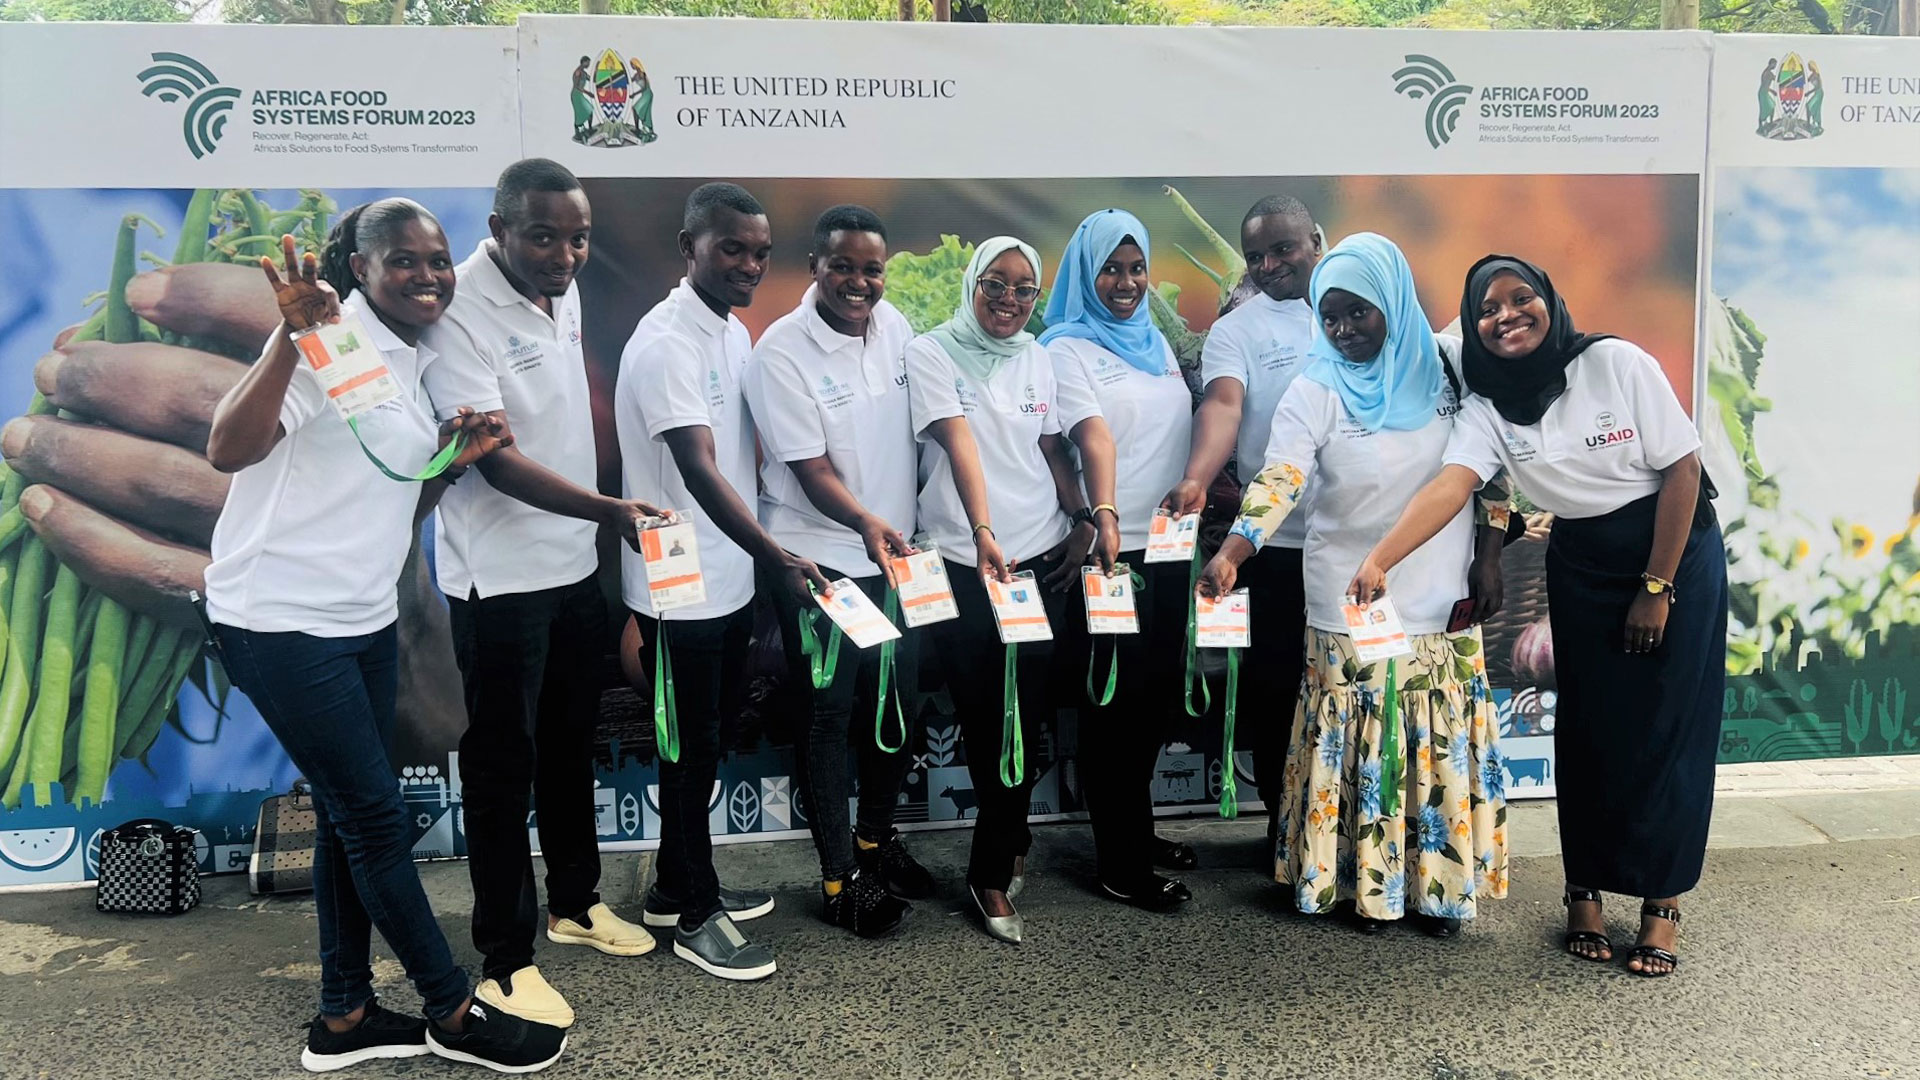 Youth Entrepreneurs' participate in the 2023 Africa Food Systems Forum. The project supported 10 youth attendees to improve their agribusinesses